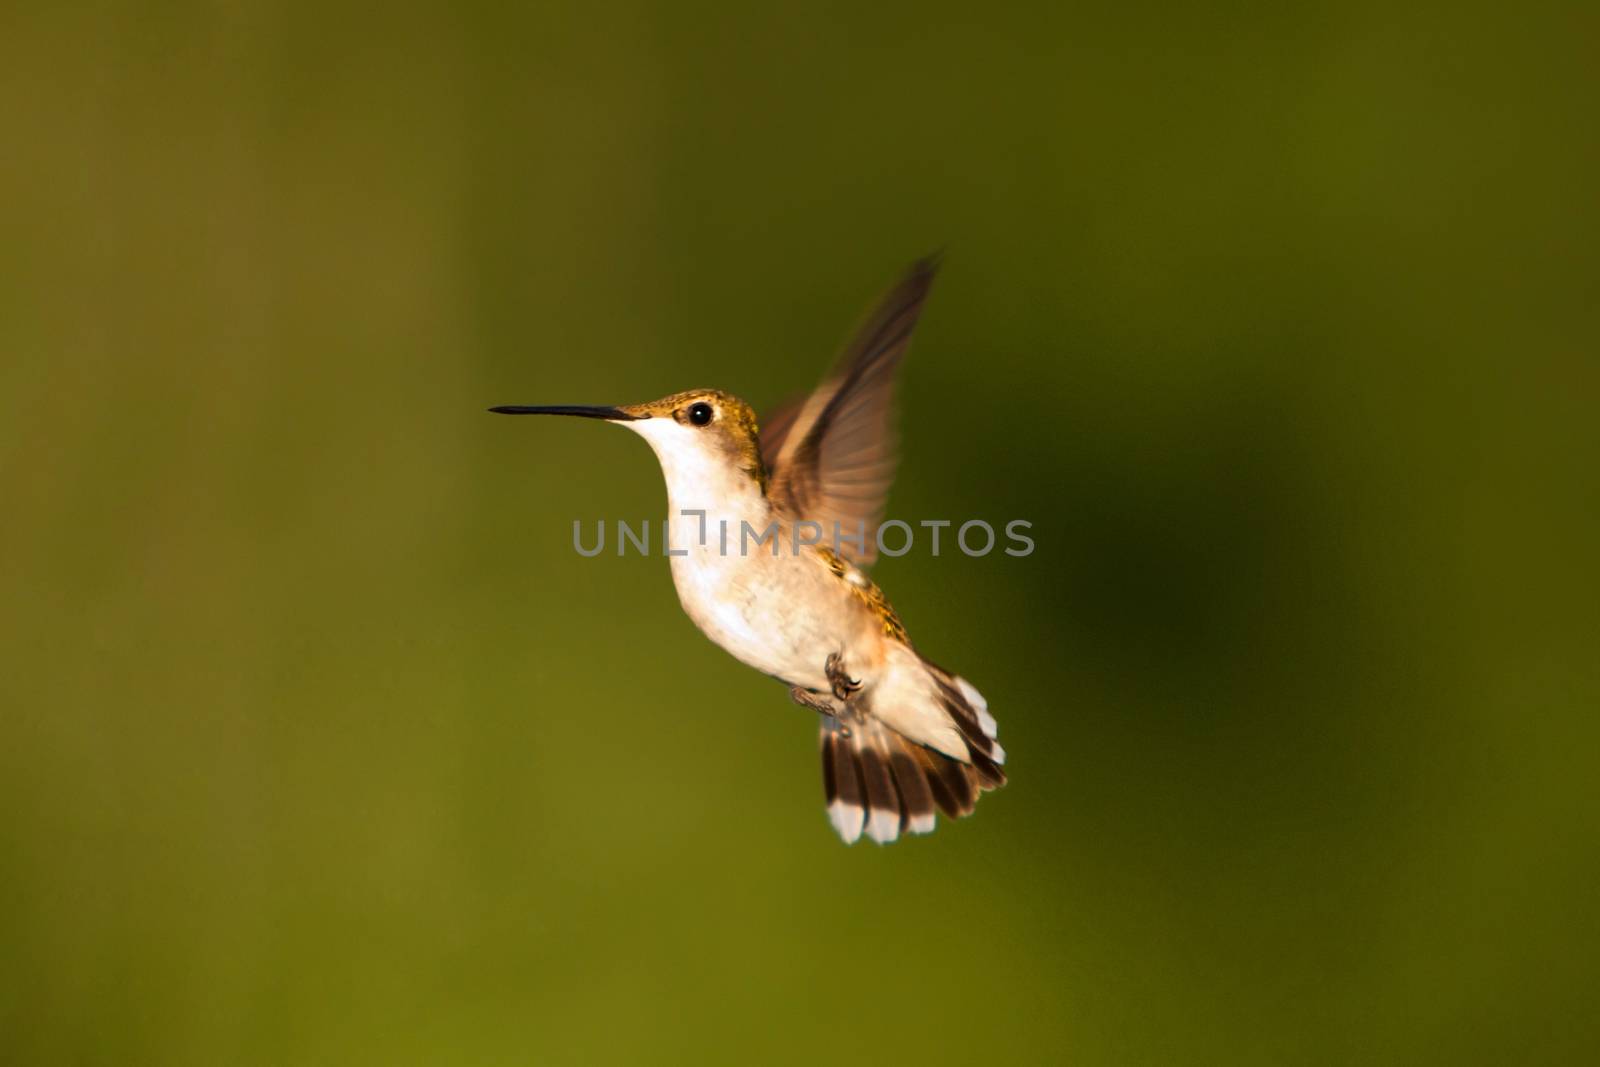 Beautiful female hummingbird mid flight with tailfeathers spread and wings up, on green blurred vegetation background.